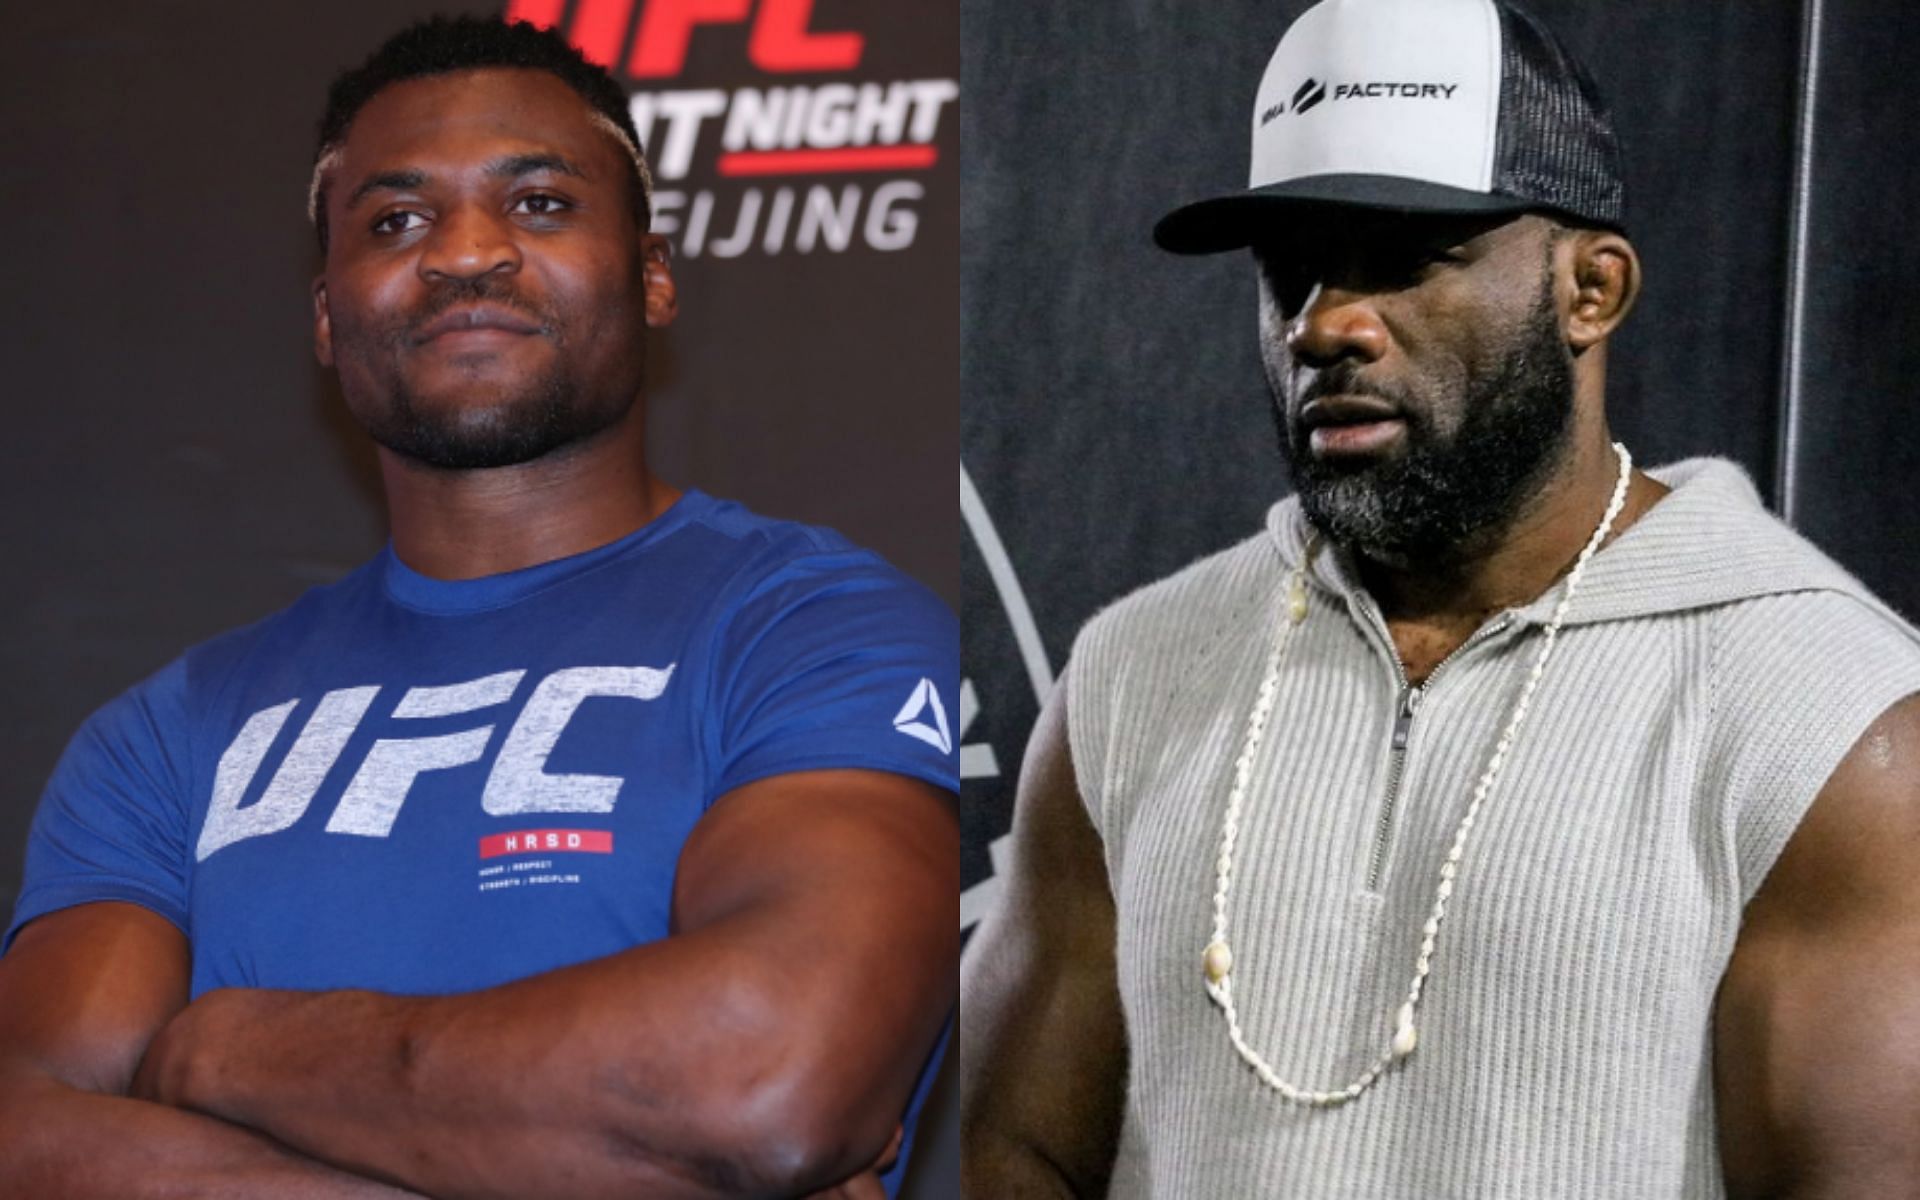 Francis Ngannou (left) and Fernand Lopez (right; Image Credit: @lopez_fernand on Instagram)